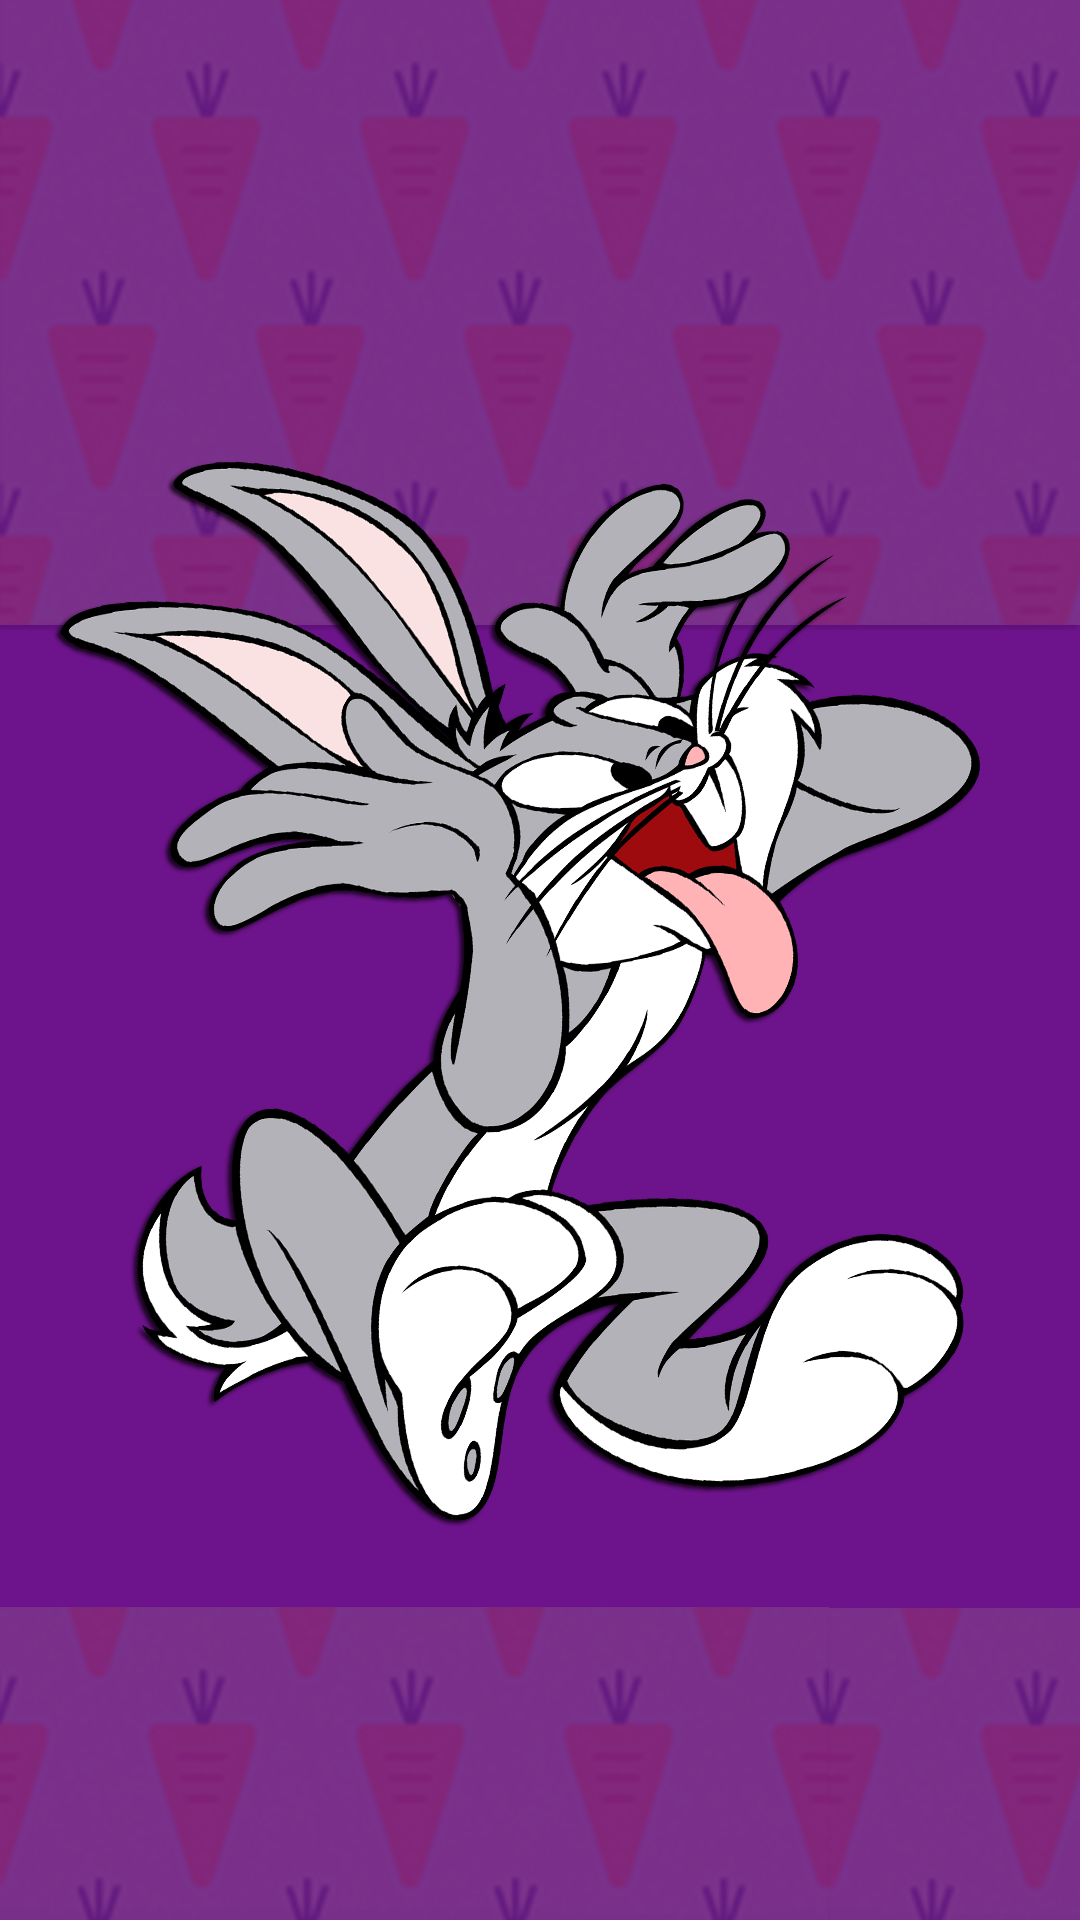 Bugs Bunny Wallpaper For Computer Bunny, Download